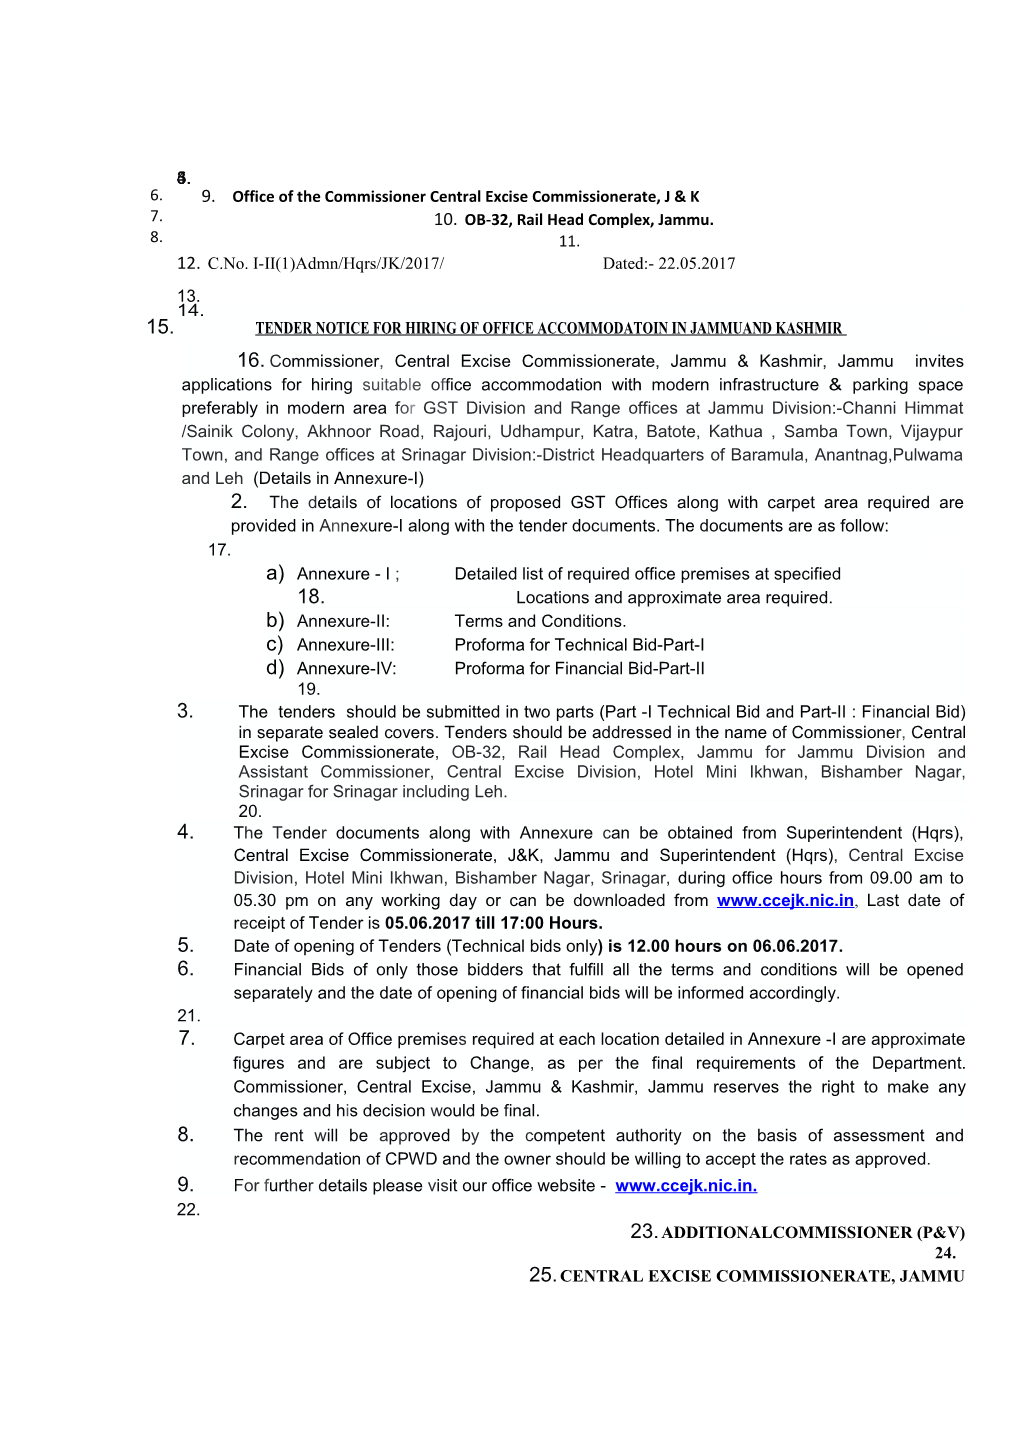 Tender Notice for Hiring of Office Accommodatoin in Jammuand Kashmir